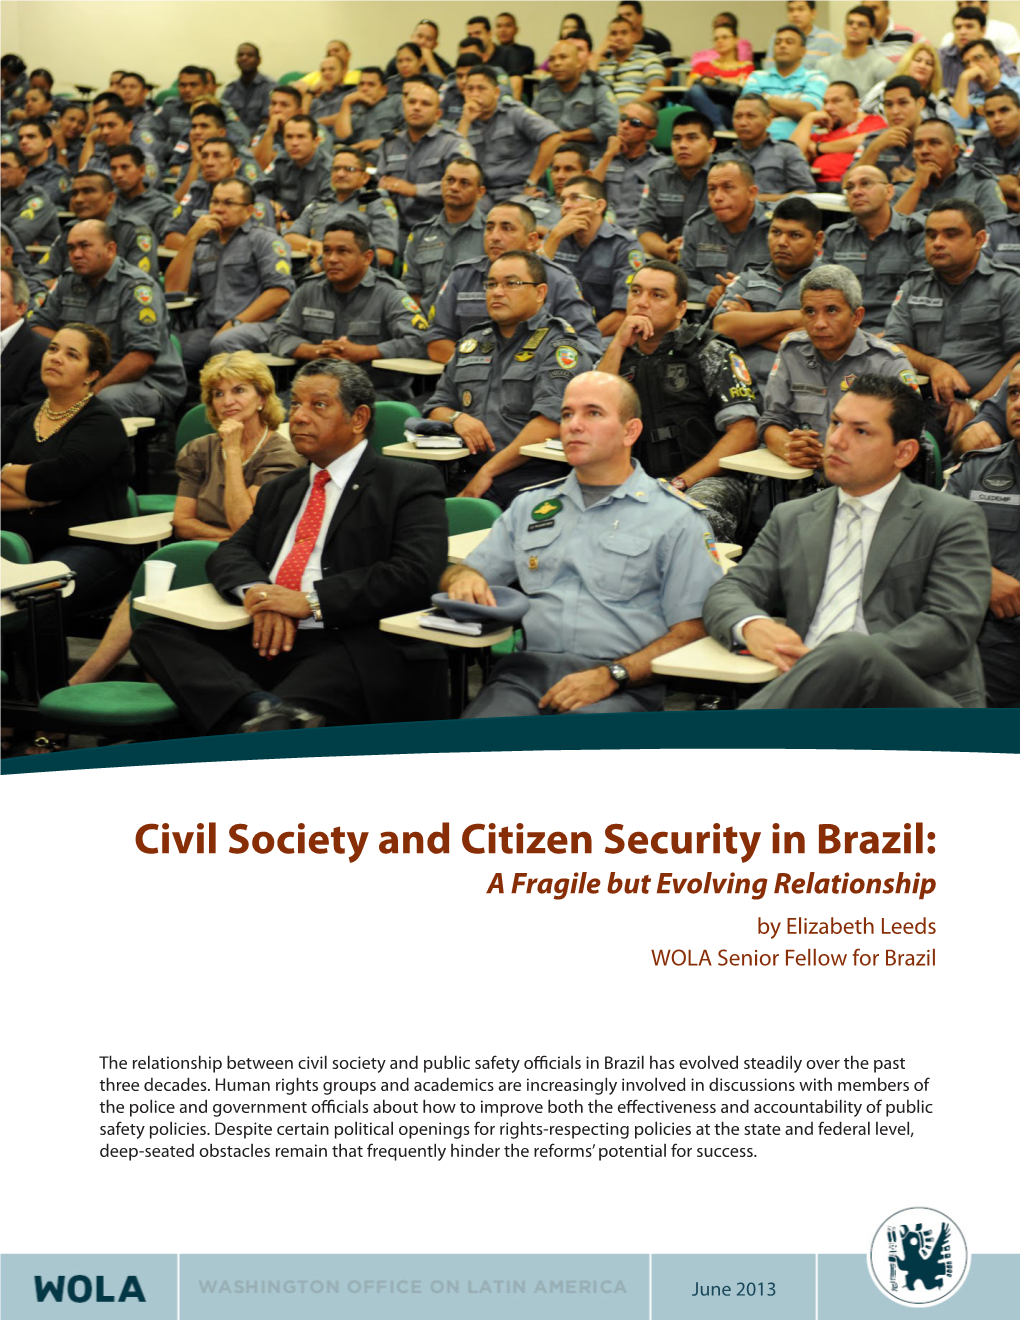 Civil Society and Citizen Security in Brazil: a Fragile but Evolving Relationship by Elizabeth Leeds WOLA Senior Fellow for Brazil